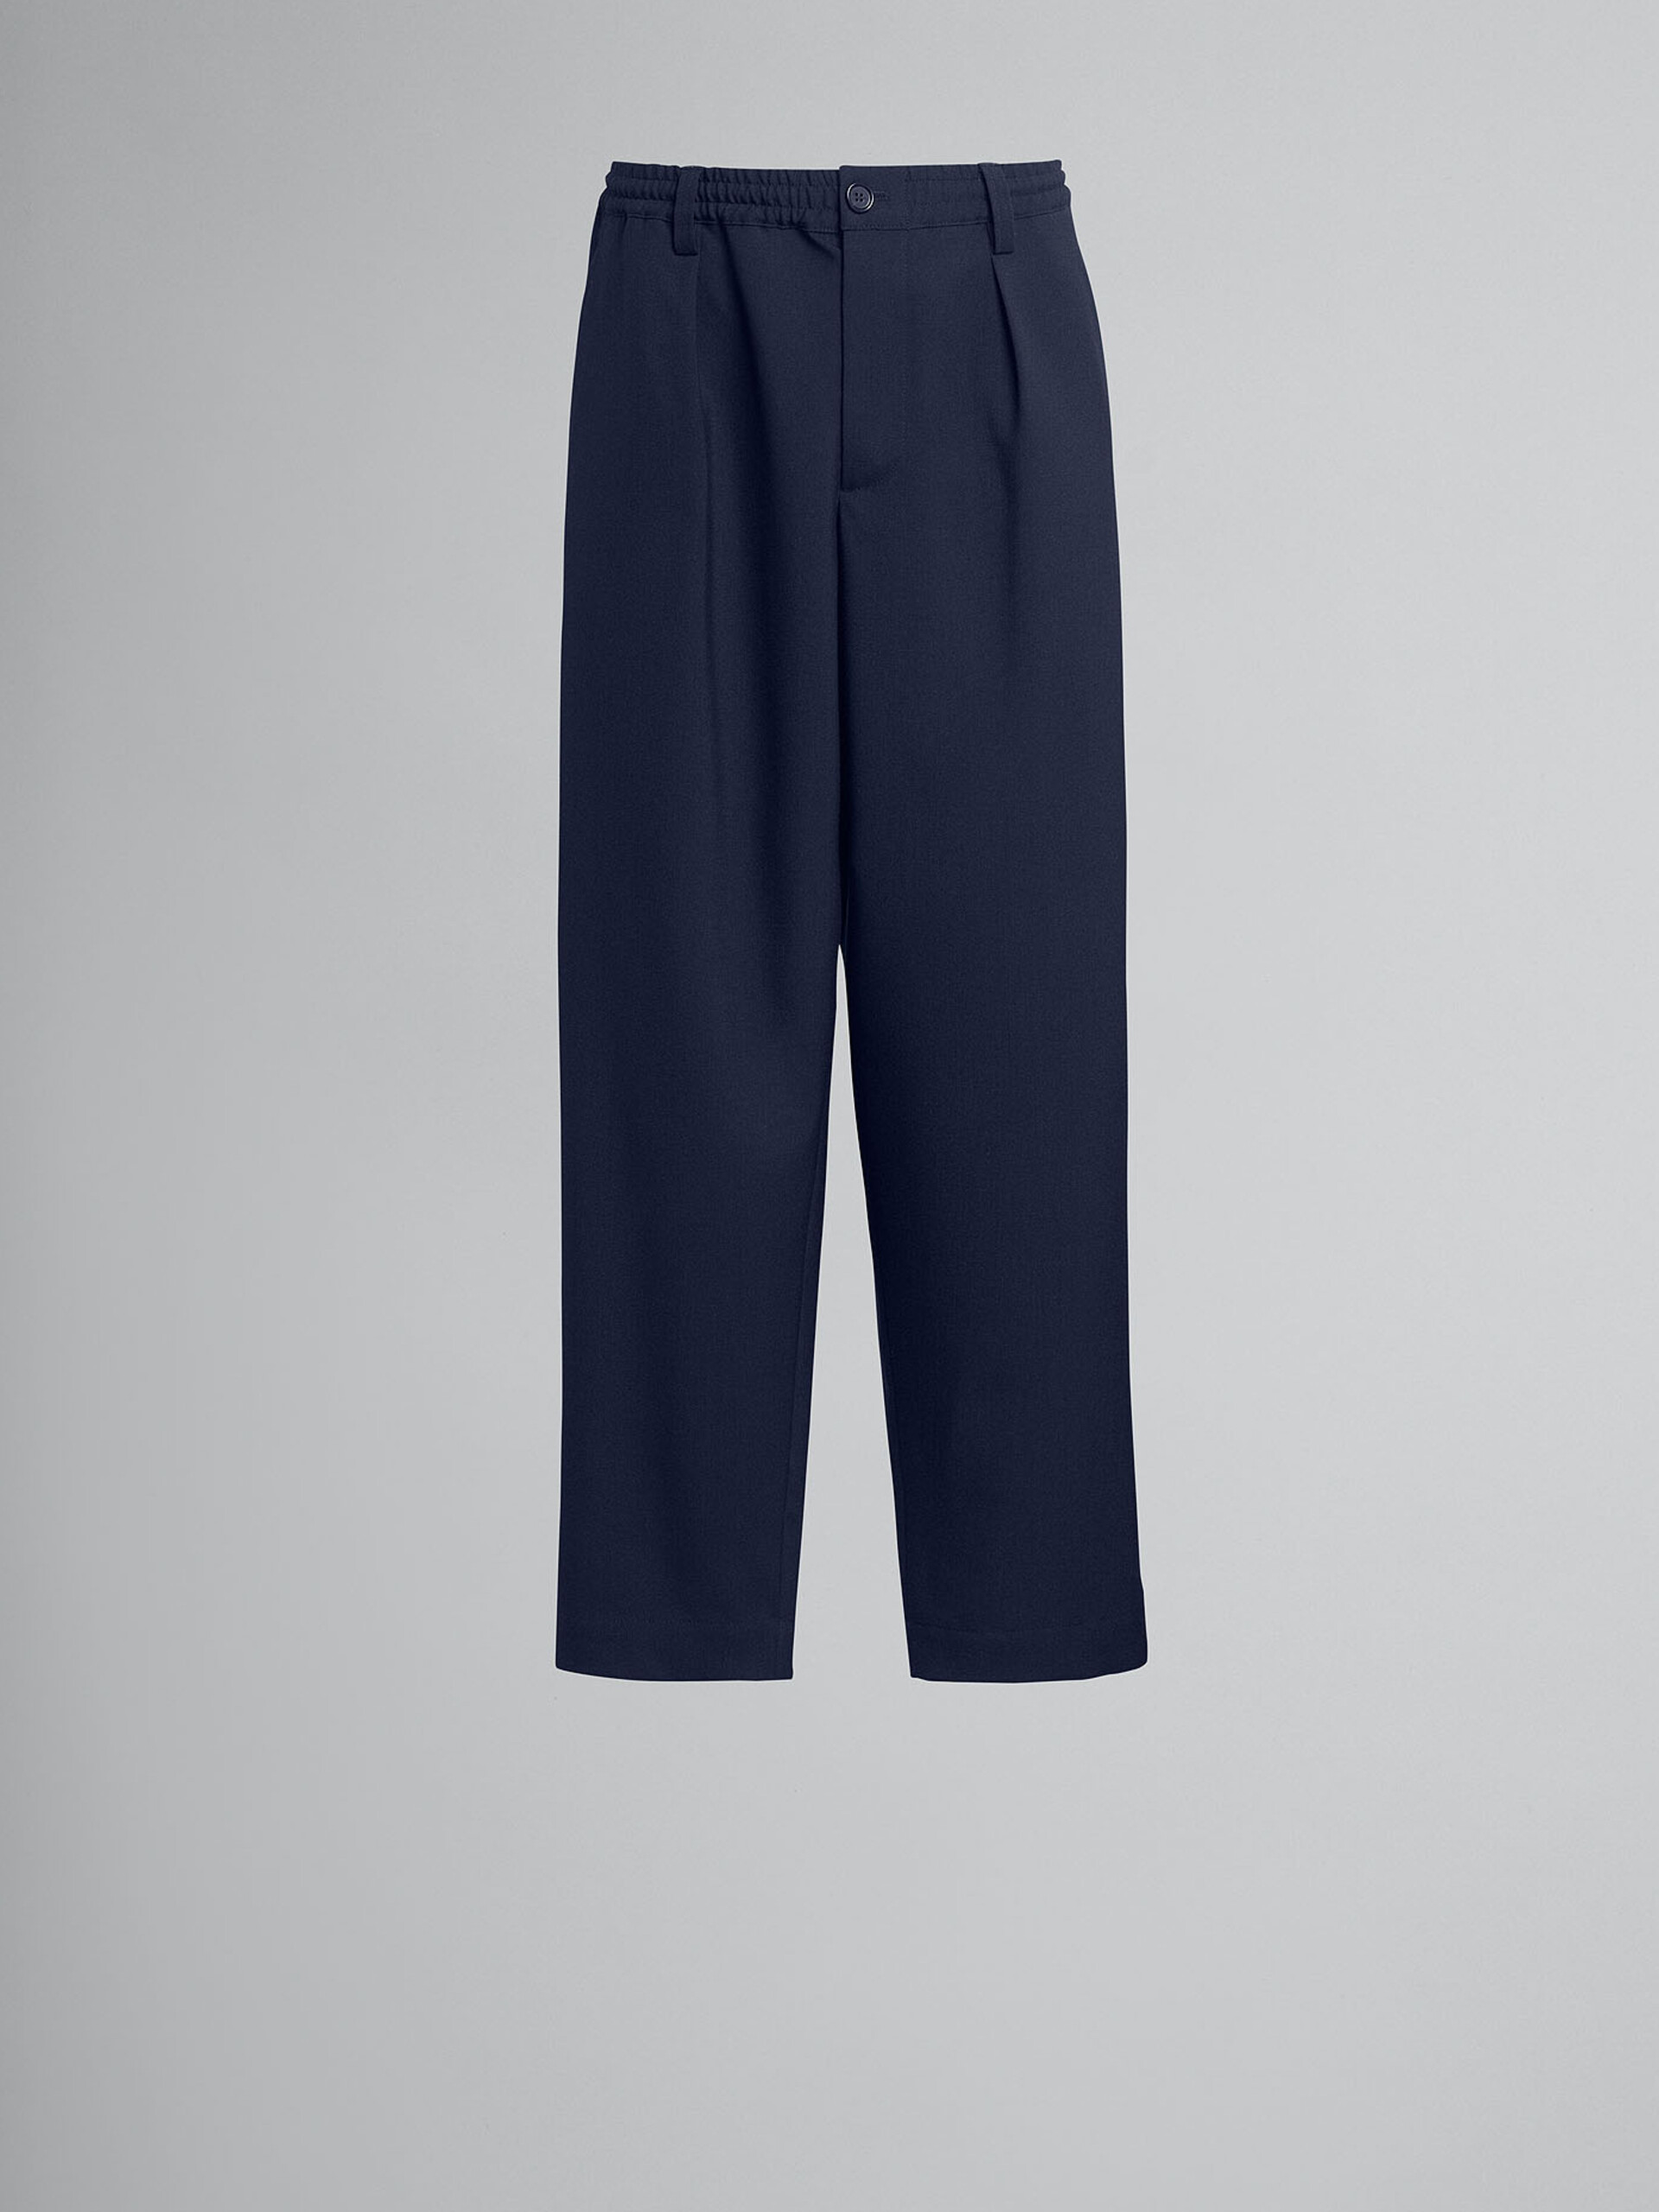 Blue cropped trousers in tropical wool - Pants - Image 1